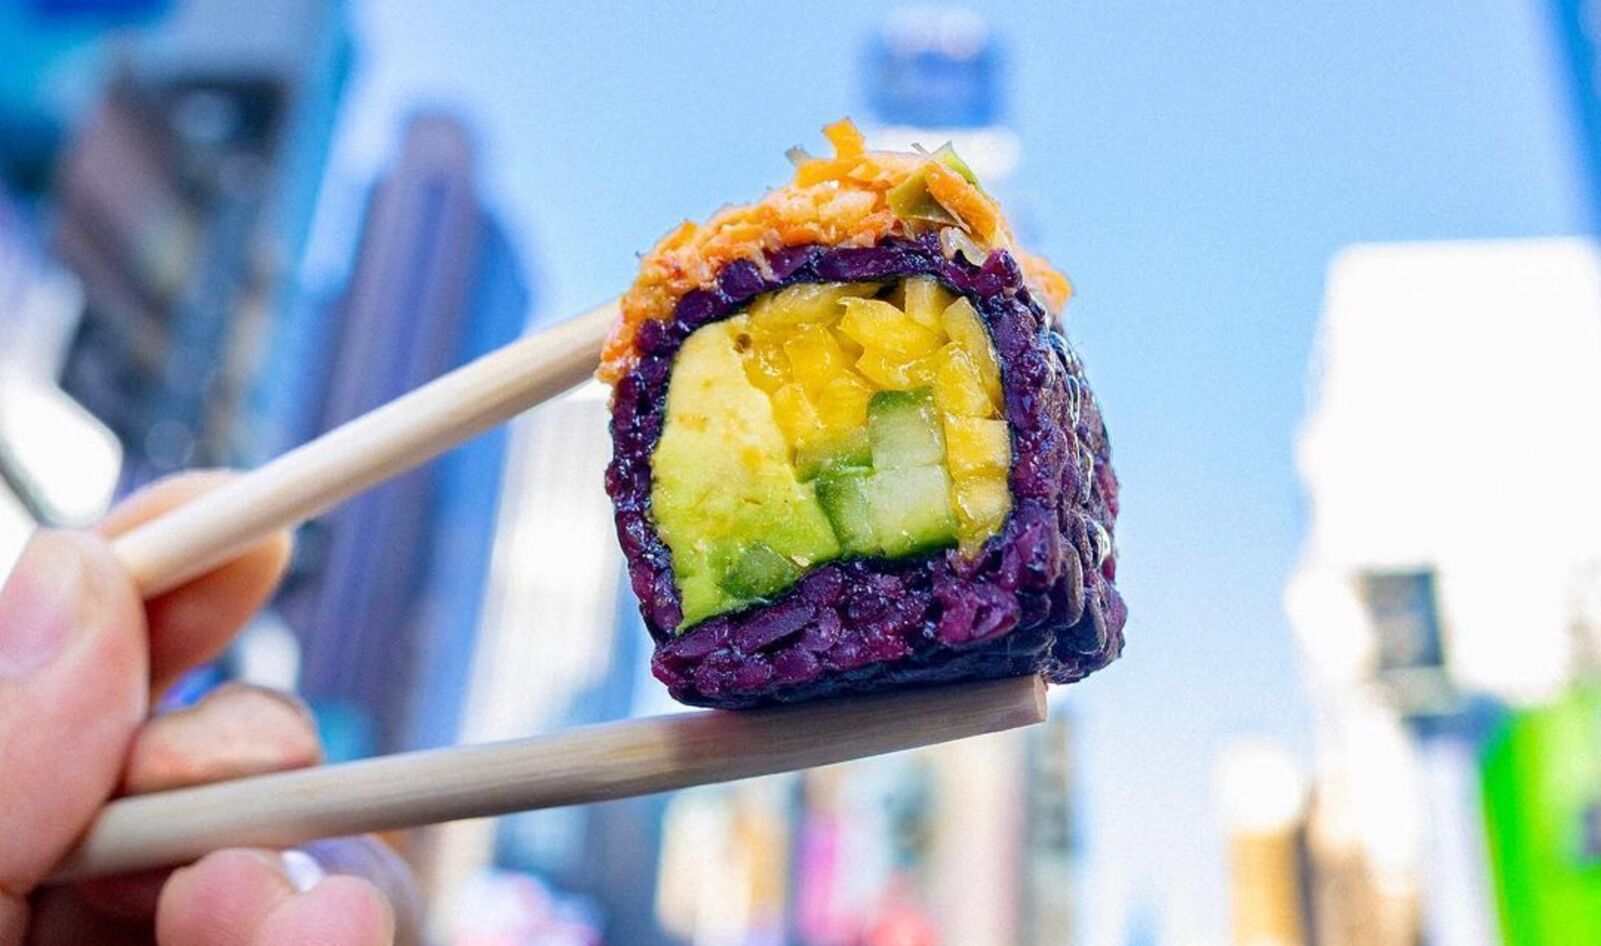 These 20 Restaurants in the US Serve Up Some of the Best Sushi—Hold the Fish